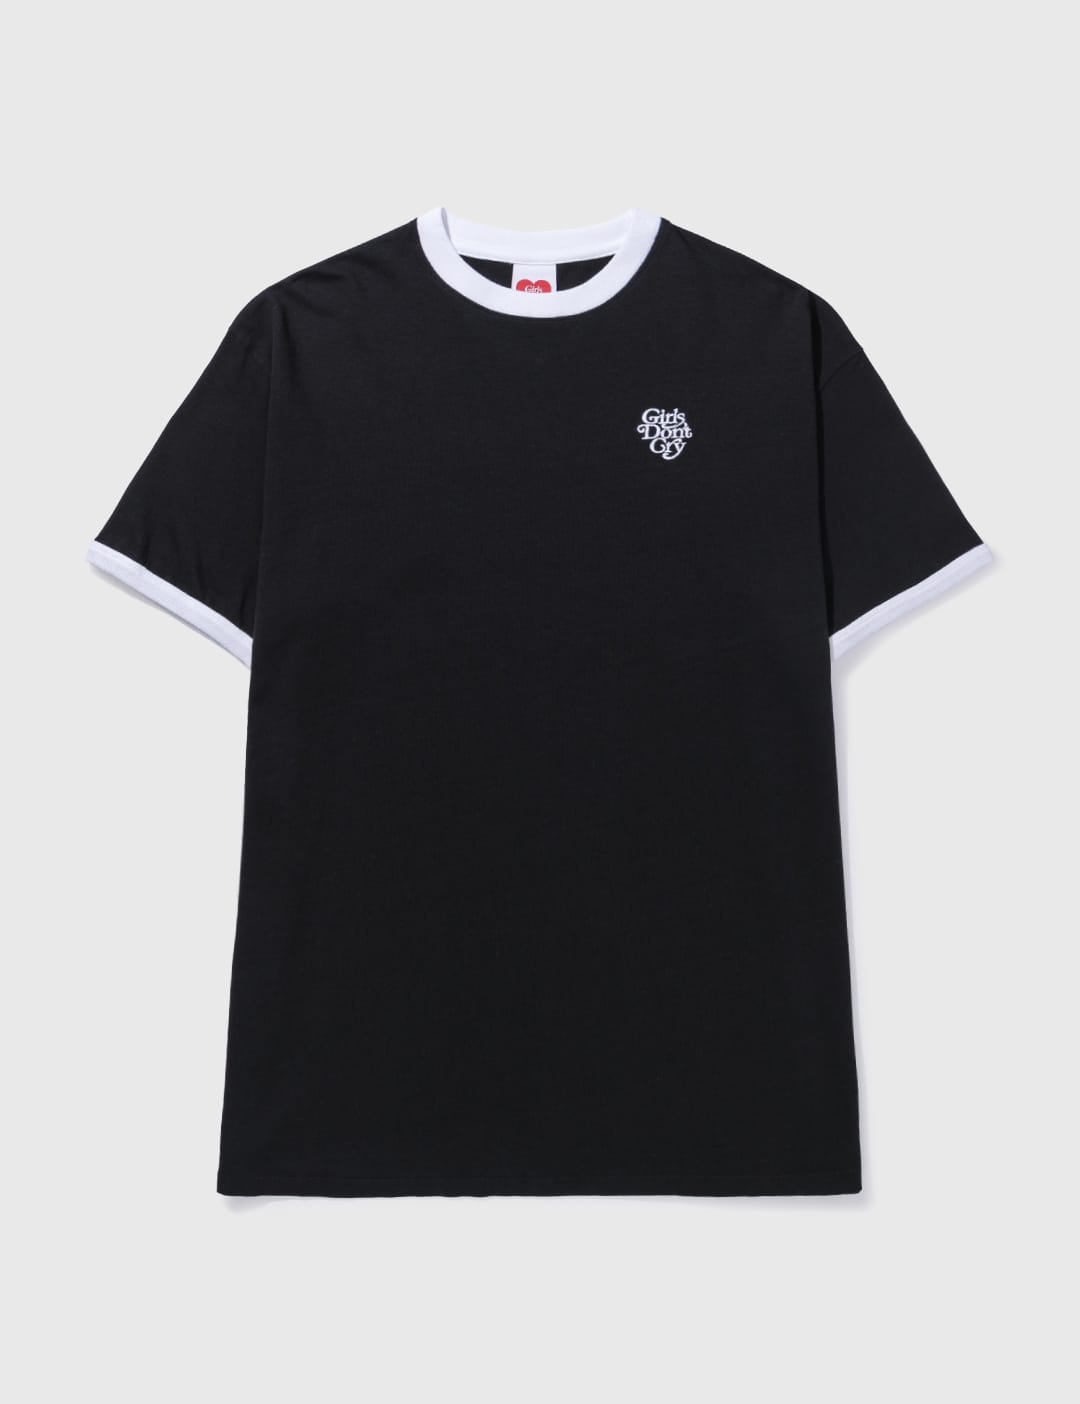 Verdy | HBX - Globally Curated Fashion and Lifestyle by Hypebeast